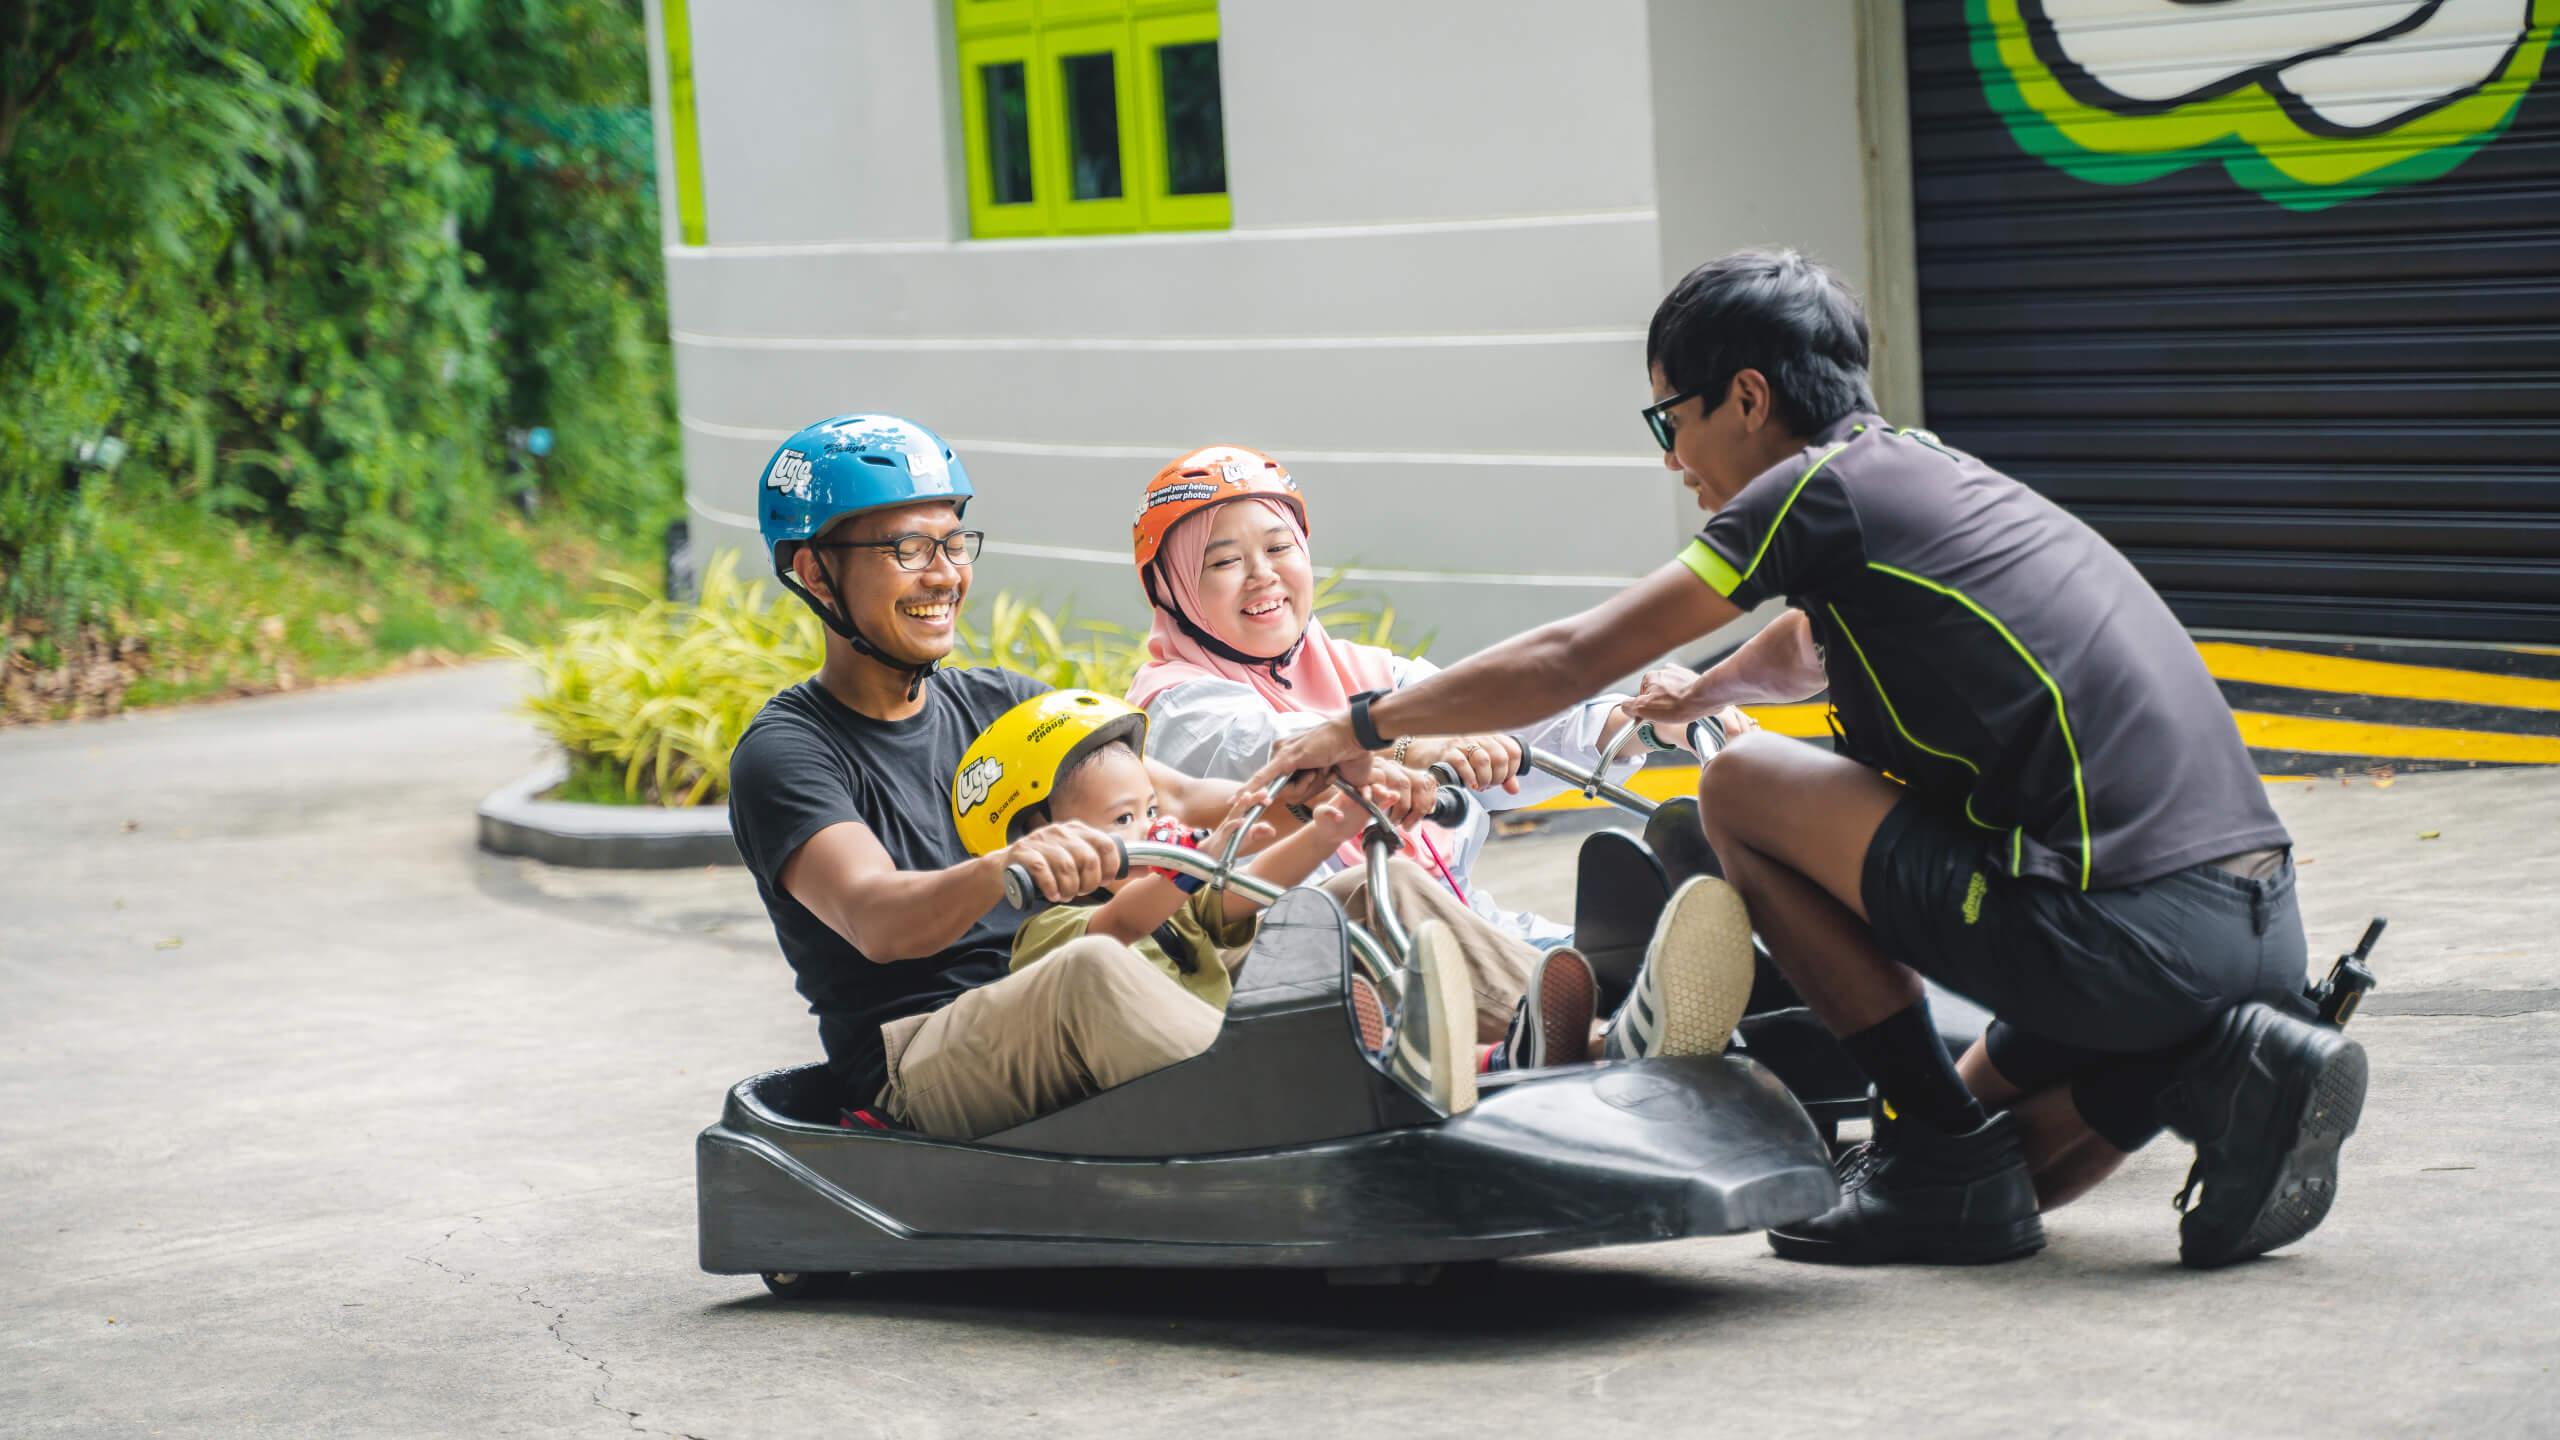 A Skyline Luge Singapore employee teaches a family how to use the Luge carts safely.